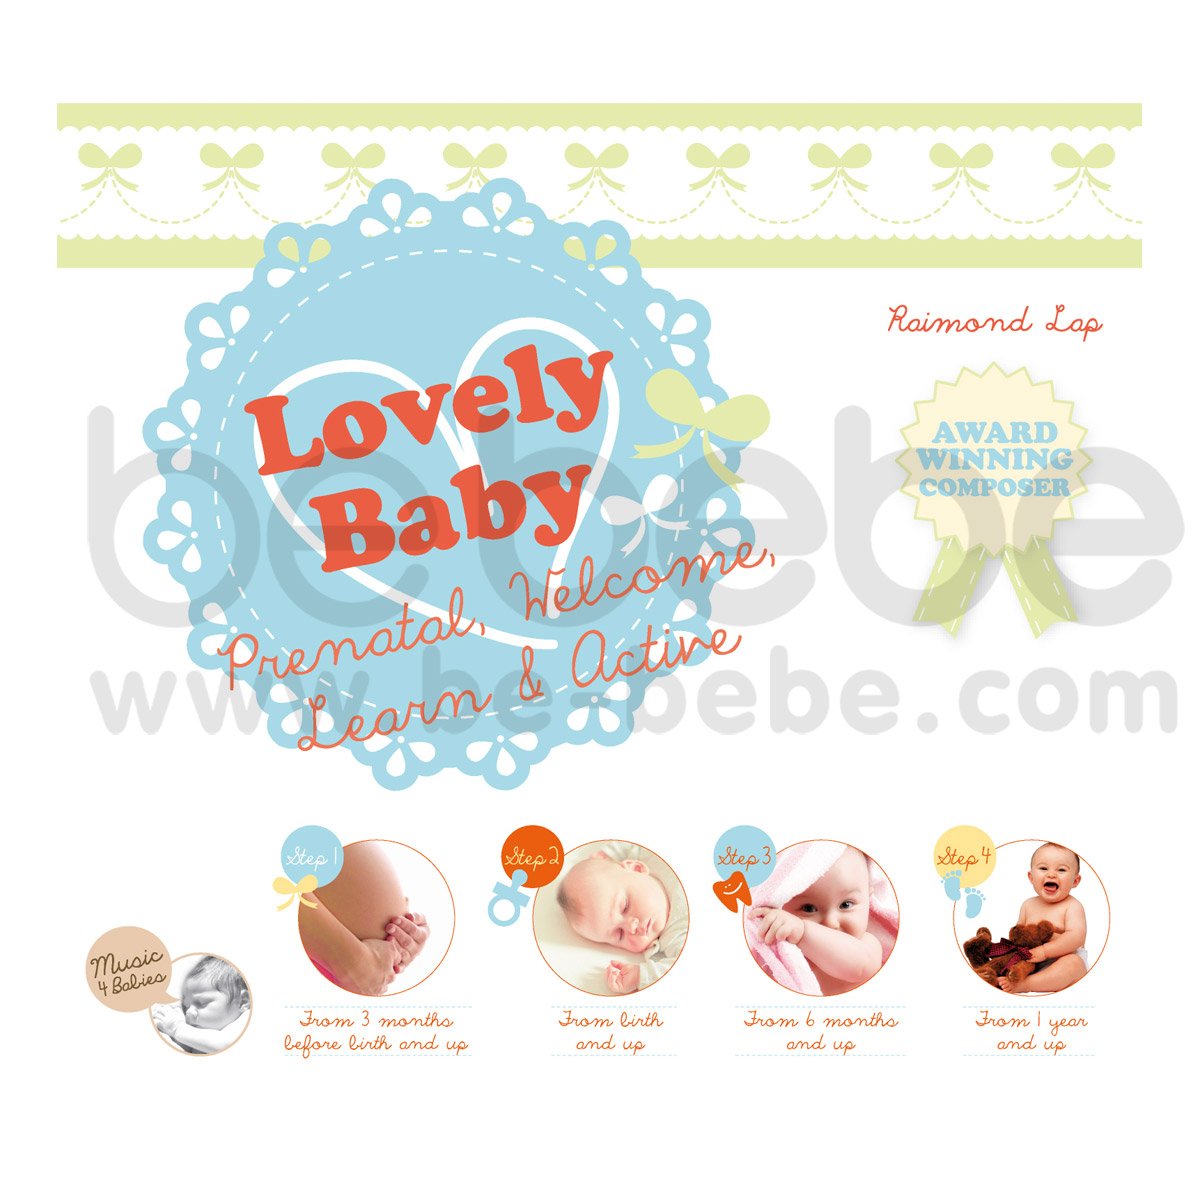 LovelyBaby : LovelyBaby Prenatal, Welcome, Learn & Active (4 CD)